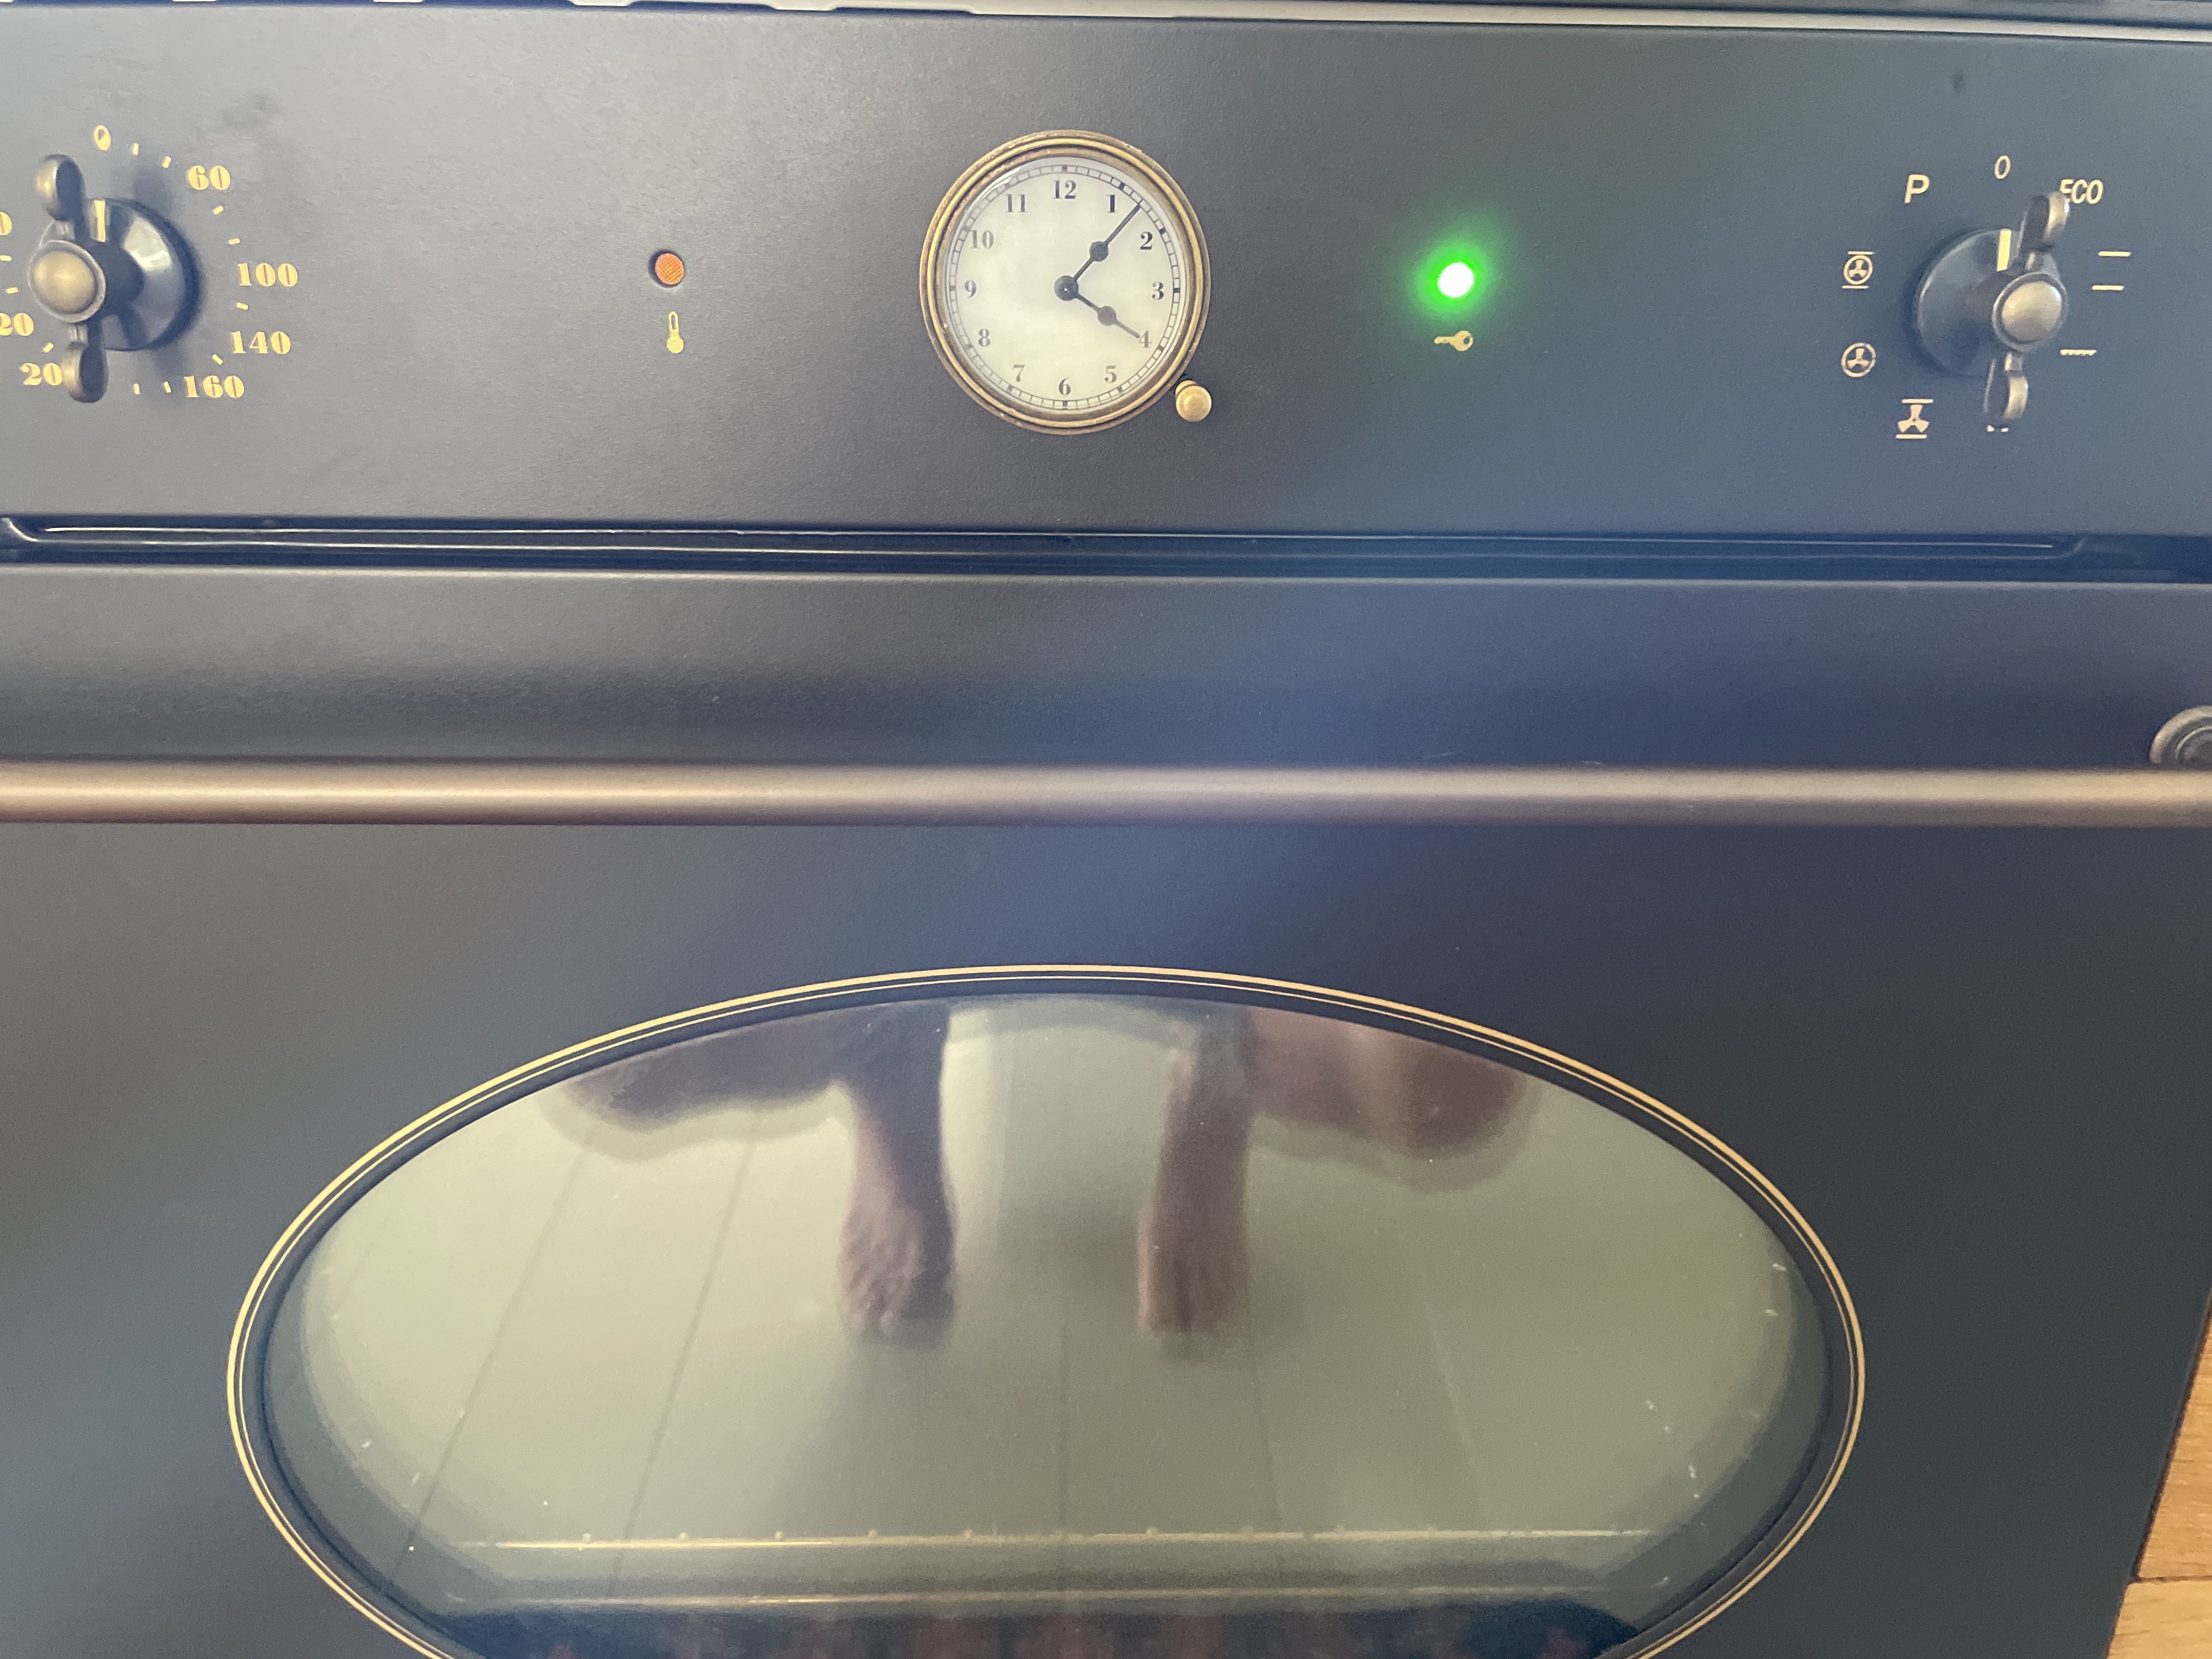 Hello
On my Smeg built-in oven SFP805AO, the light with the key symbol lights up constantly green, ...